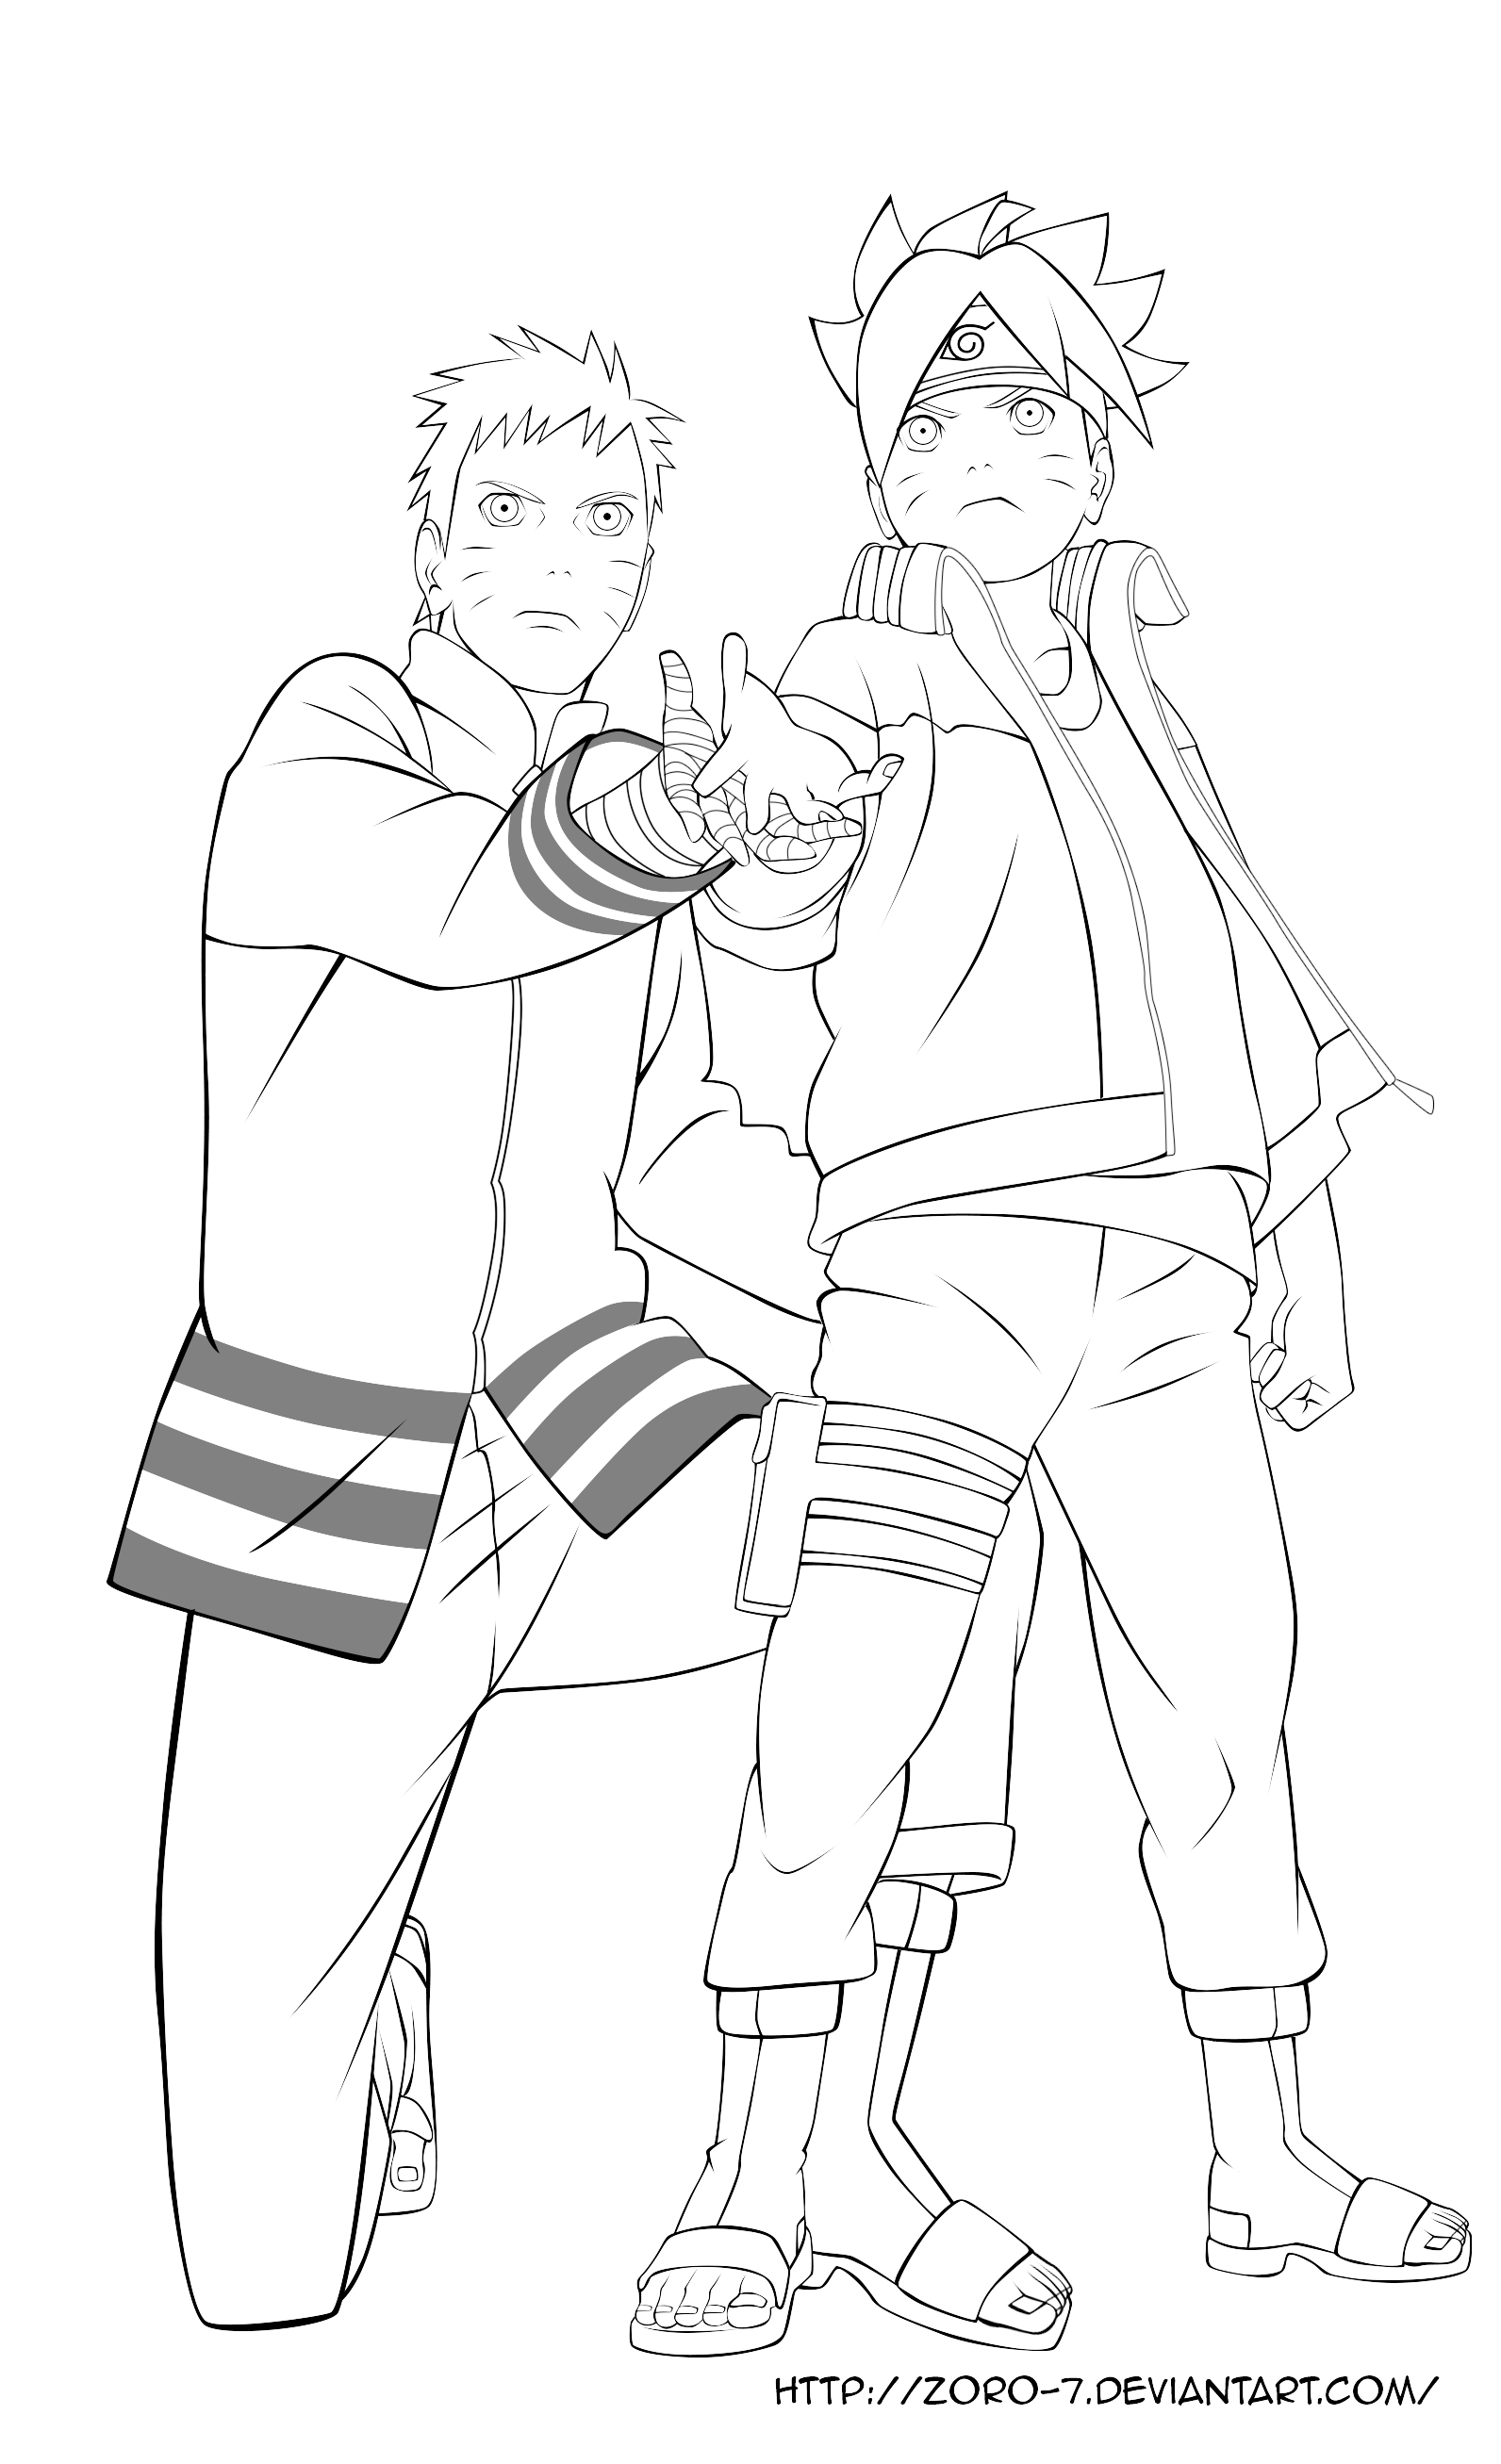 NARUTO with his son - LineART (PSD) by Zoro-7 on DeviantArt